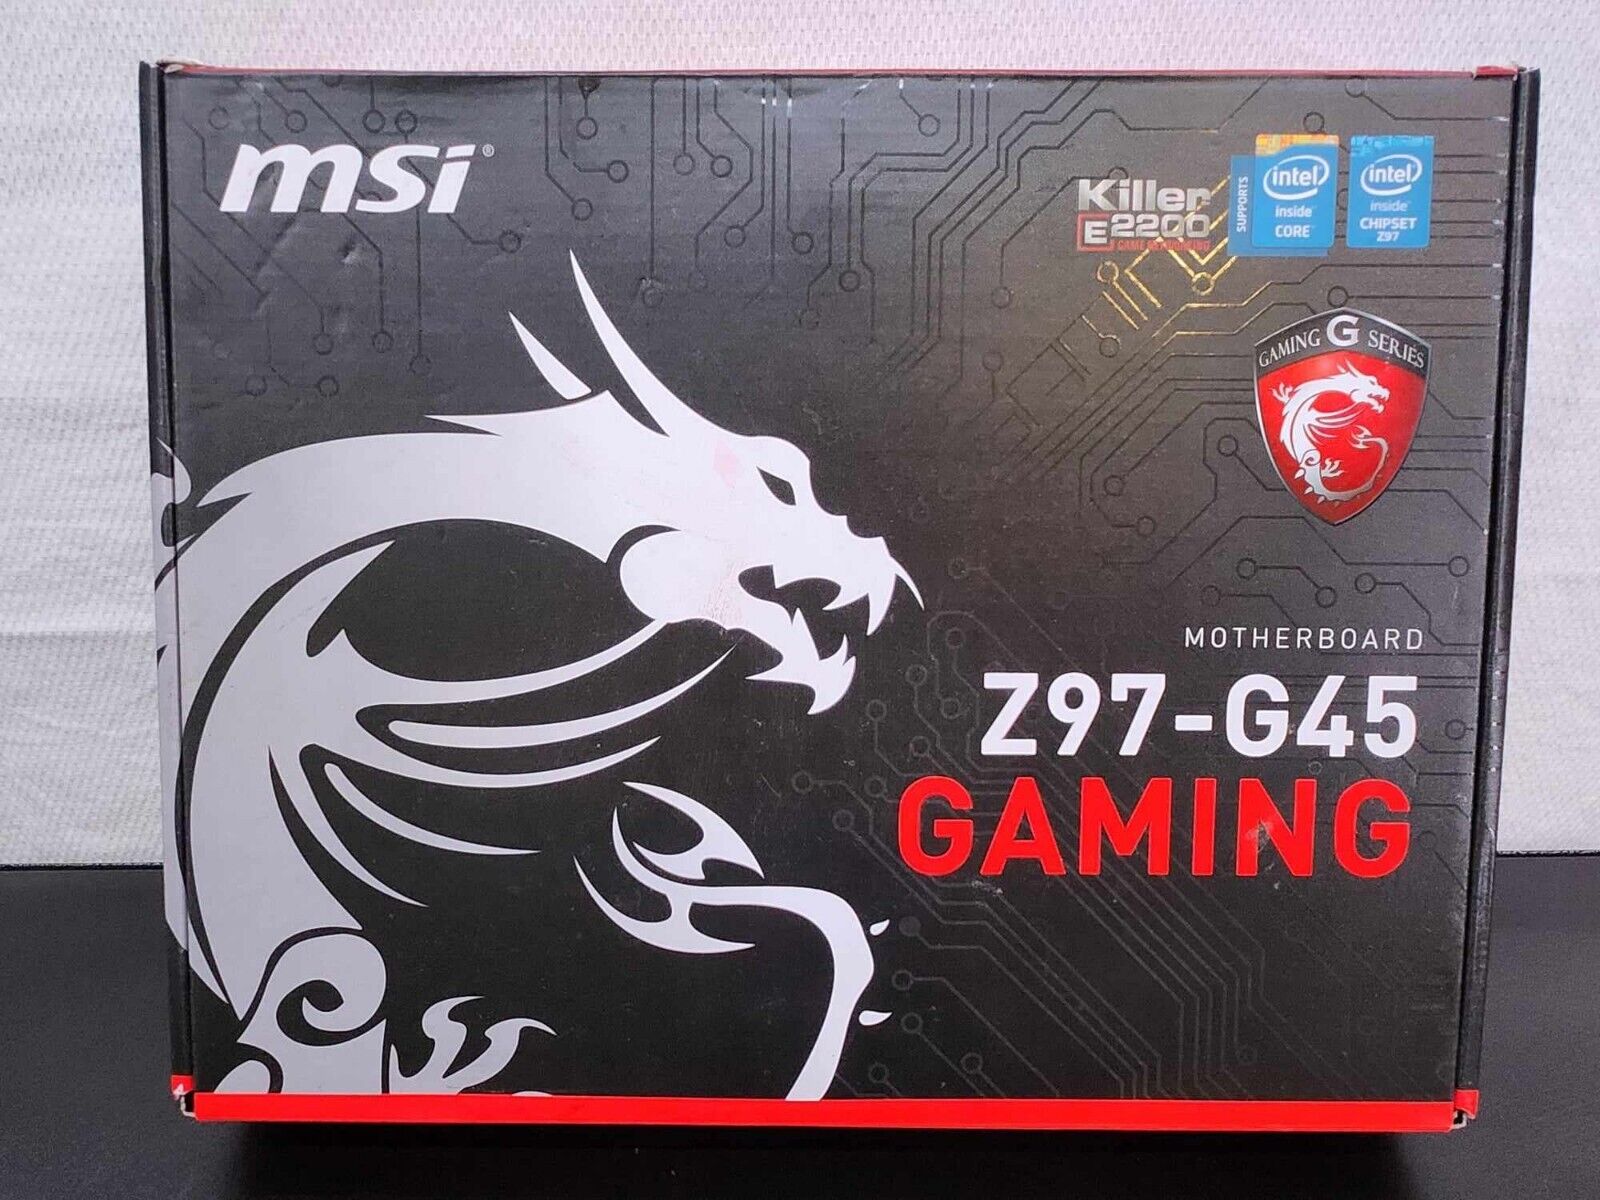 MSI Z97-G45 GAMING motherboard  With Intel Core 5-4430 Processor